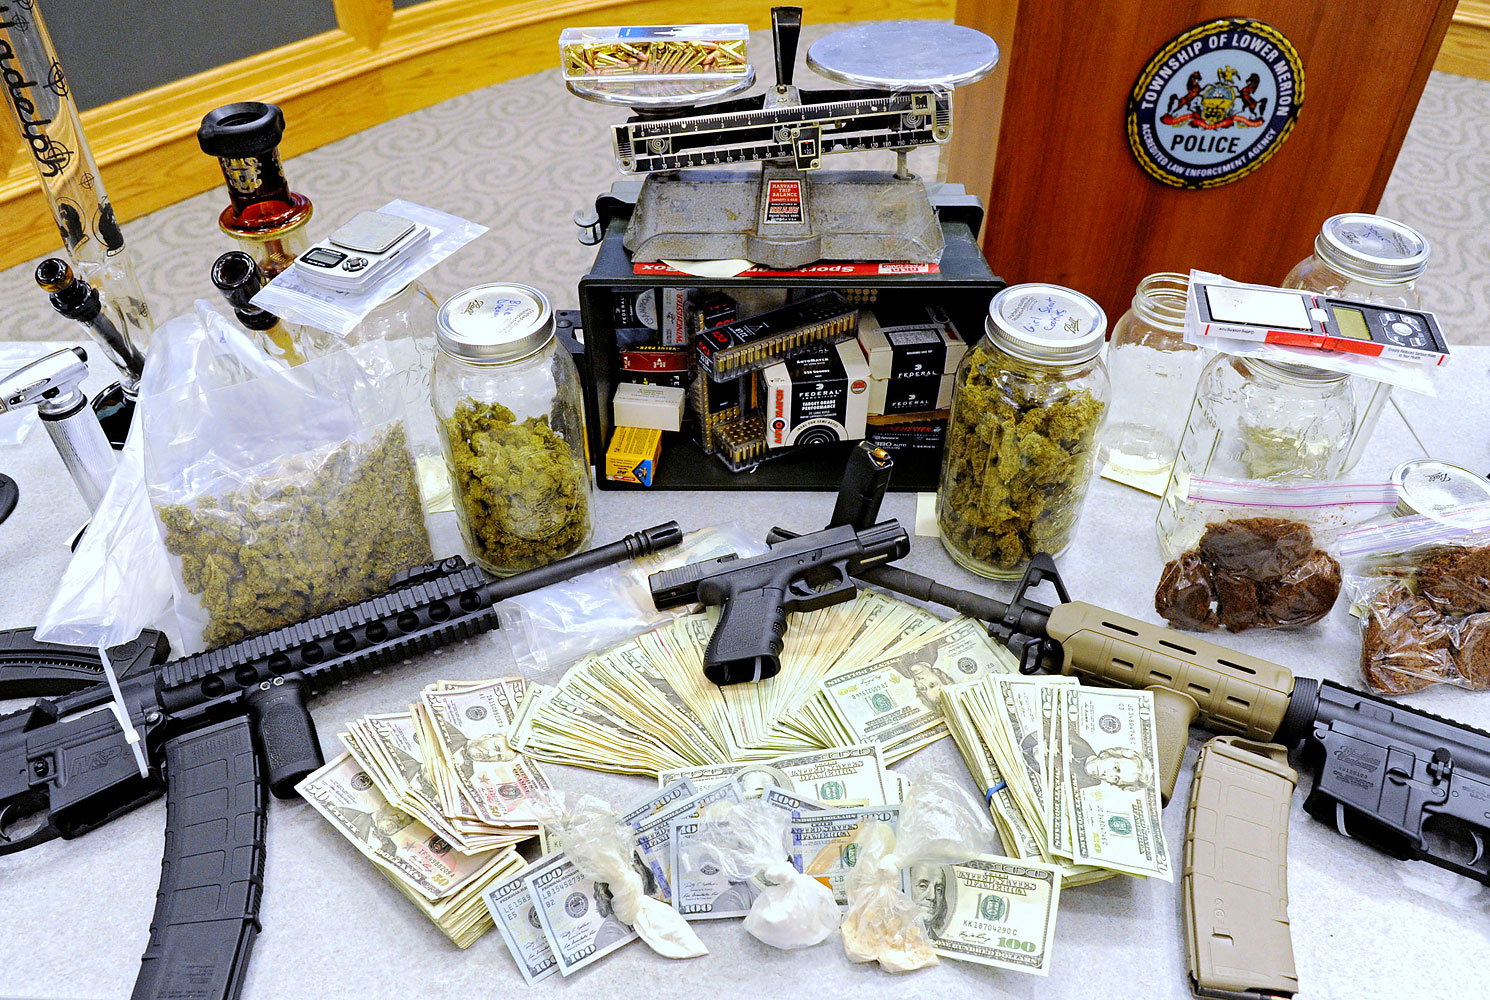 Drugs, guns and other illegal items were seized when Lower Merion Police broke up a drug-distribution ring in Montgomery County, Pa. (Clem Murray&mdash;The Philadelphia Inquirer/AP)